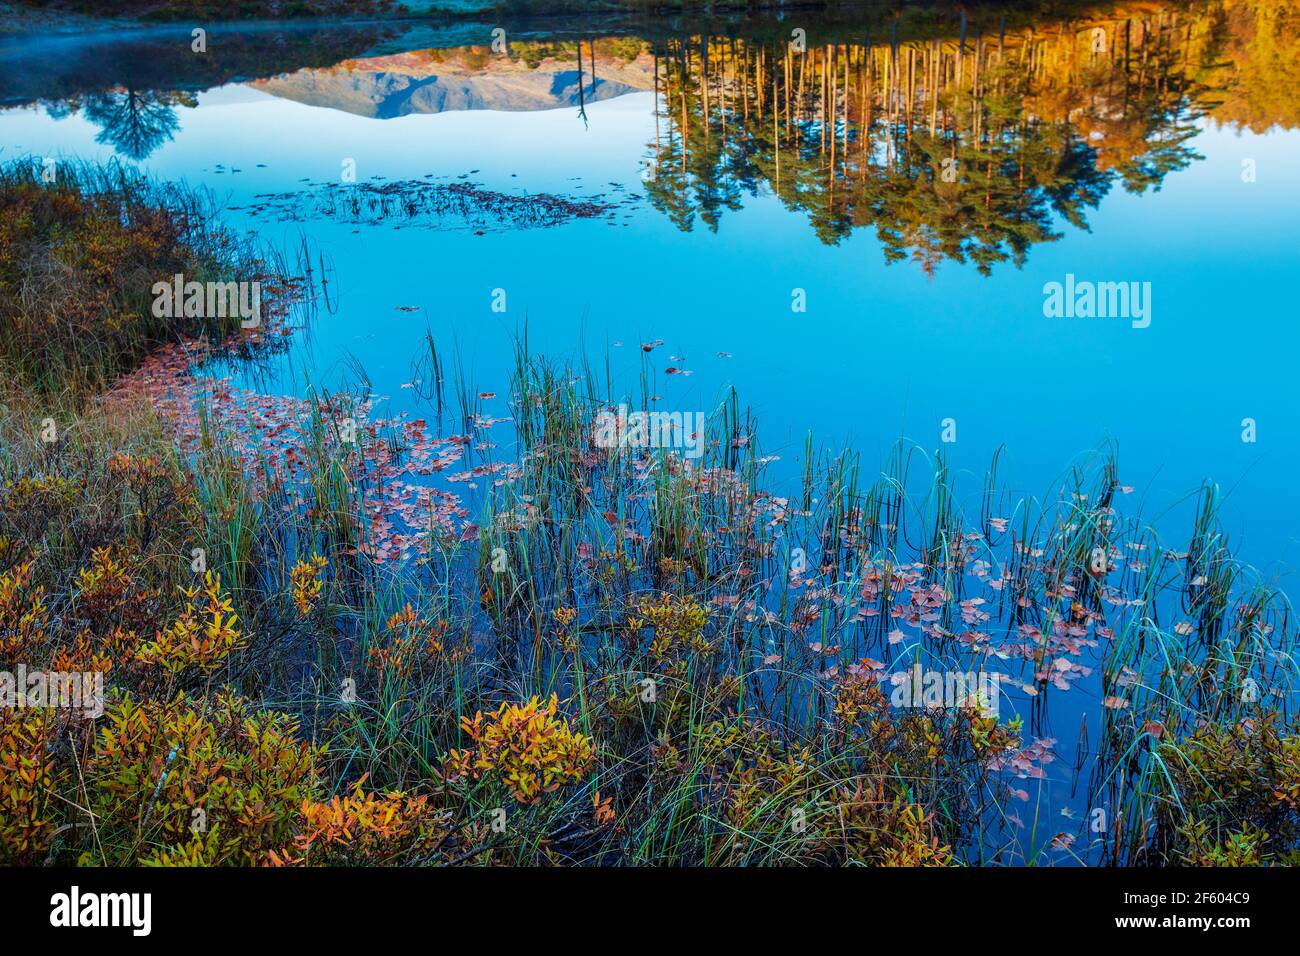 Close up of Tarn Hows lake in Cumbria with vibrant aquatic plants and reflections of the surrounding hills and trees Stock Photo